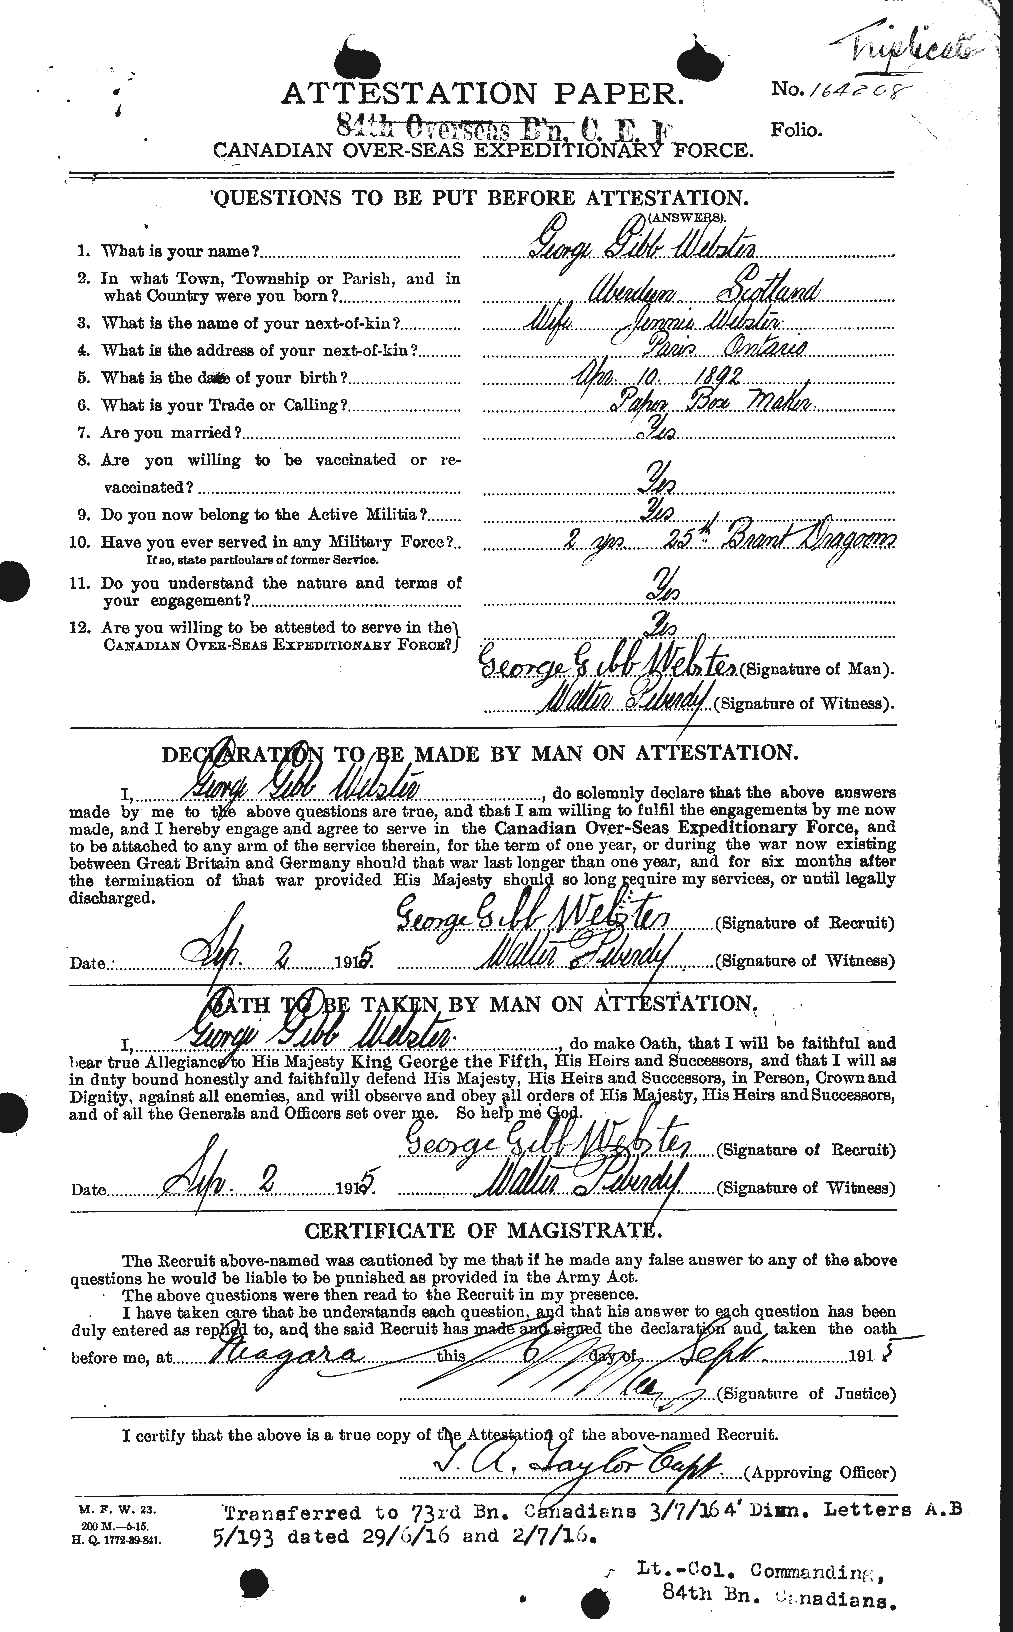 Personnel Records of the First World War - CEF 670387a